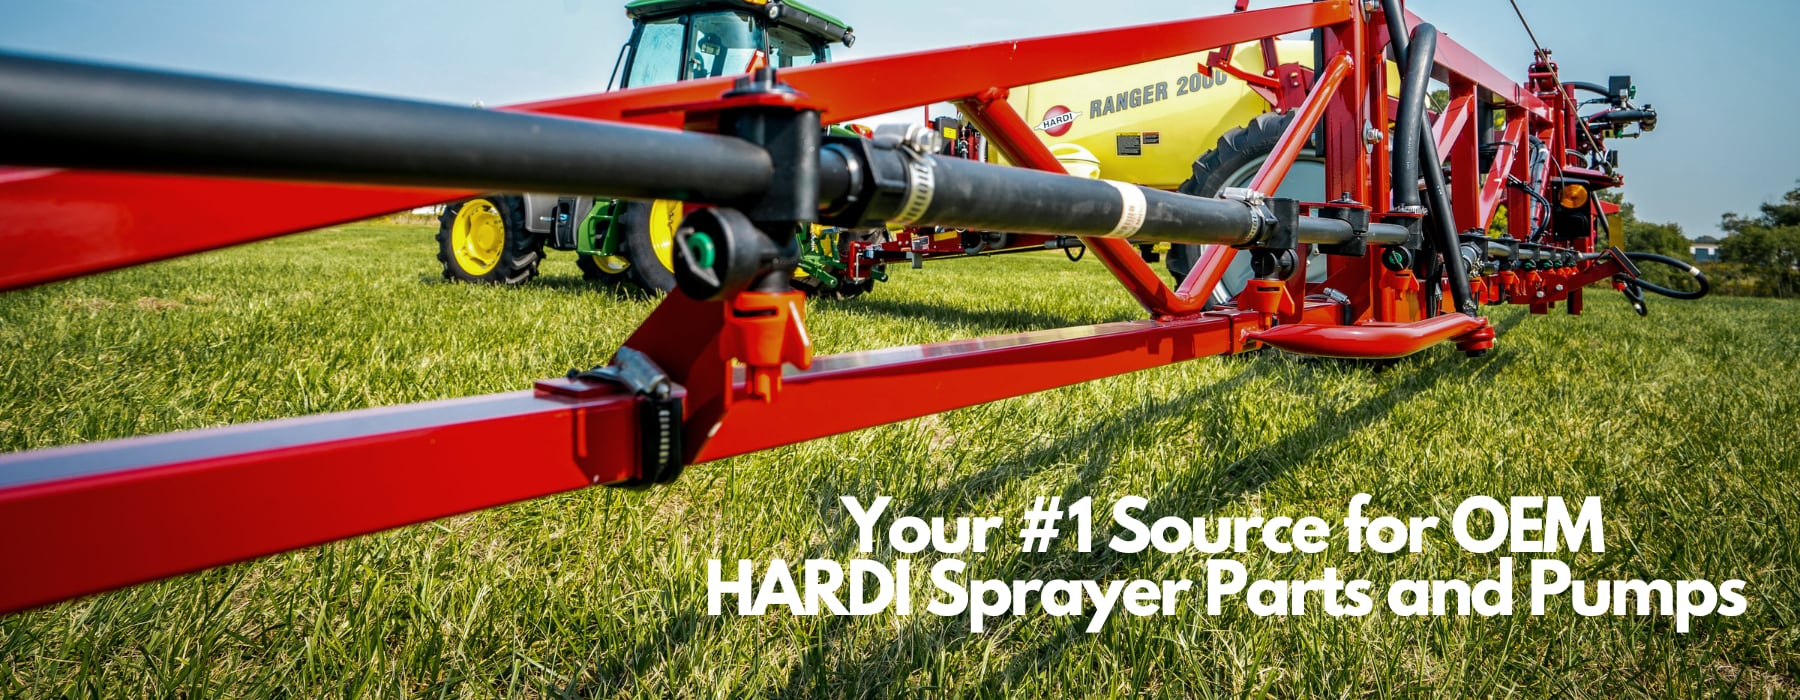 Your #1 source for HARDI Sprayer Parts